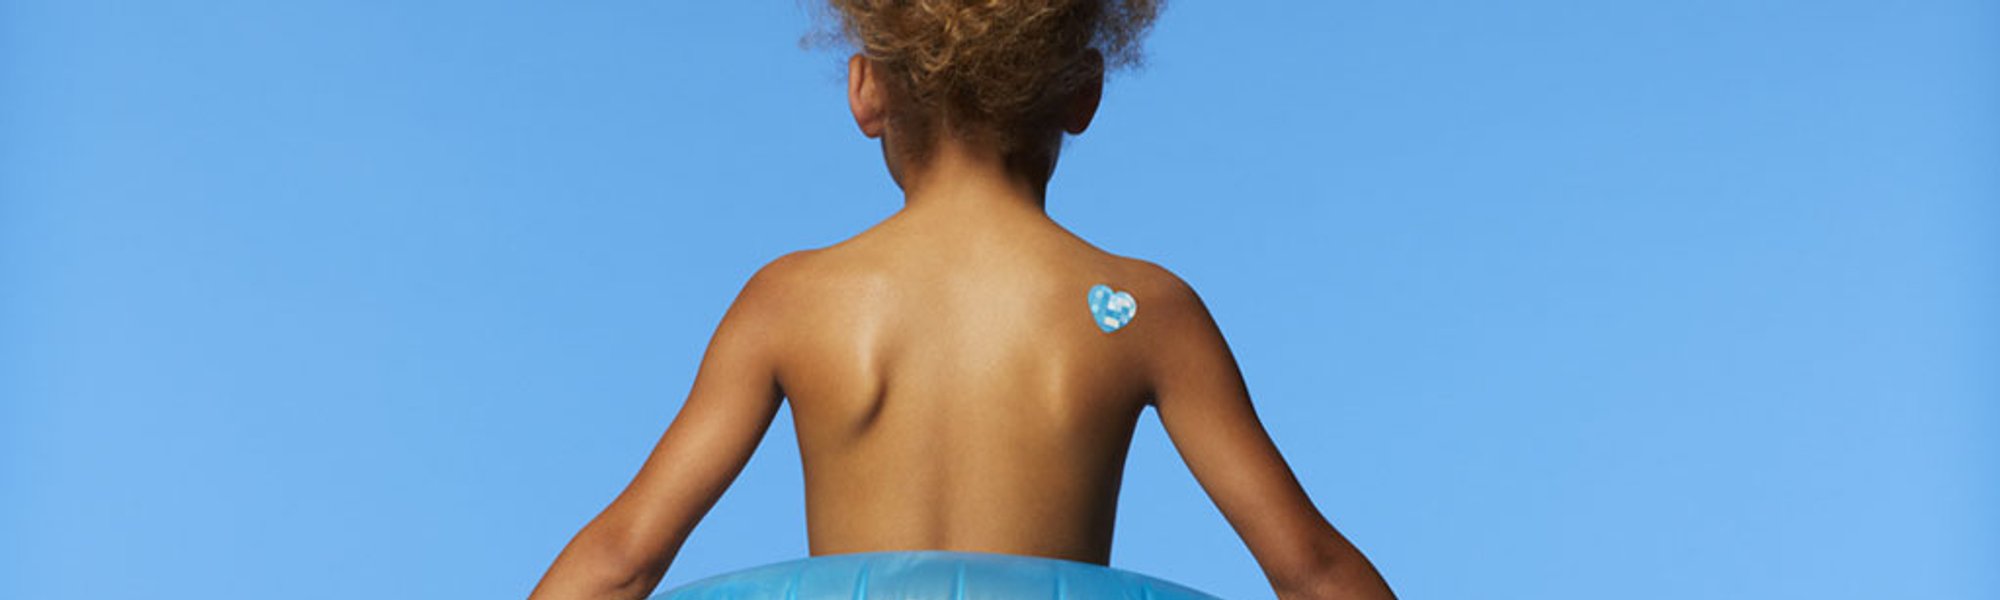 Larocheposay ArticlePage Sun Sunscreen for kids How to protect childre